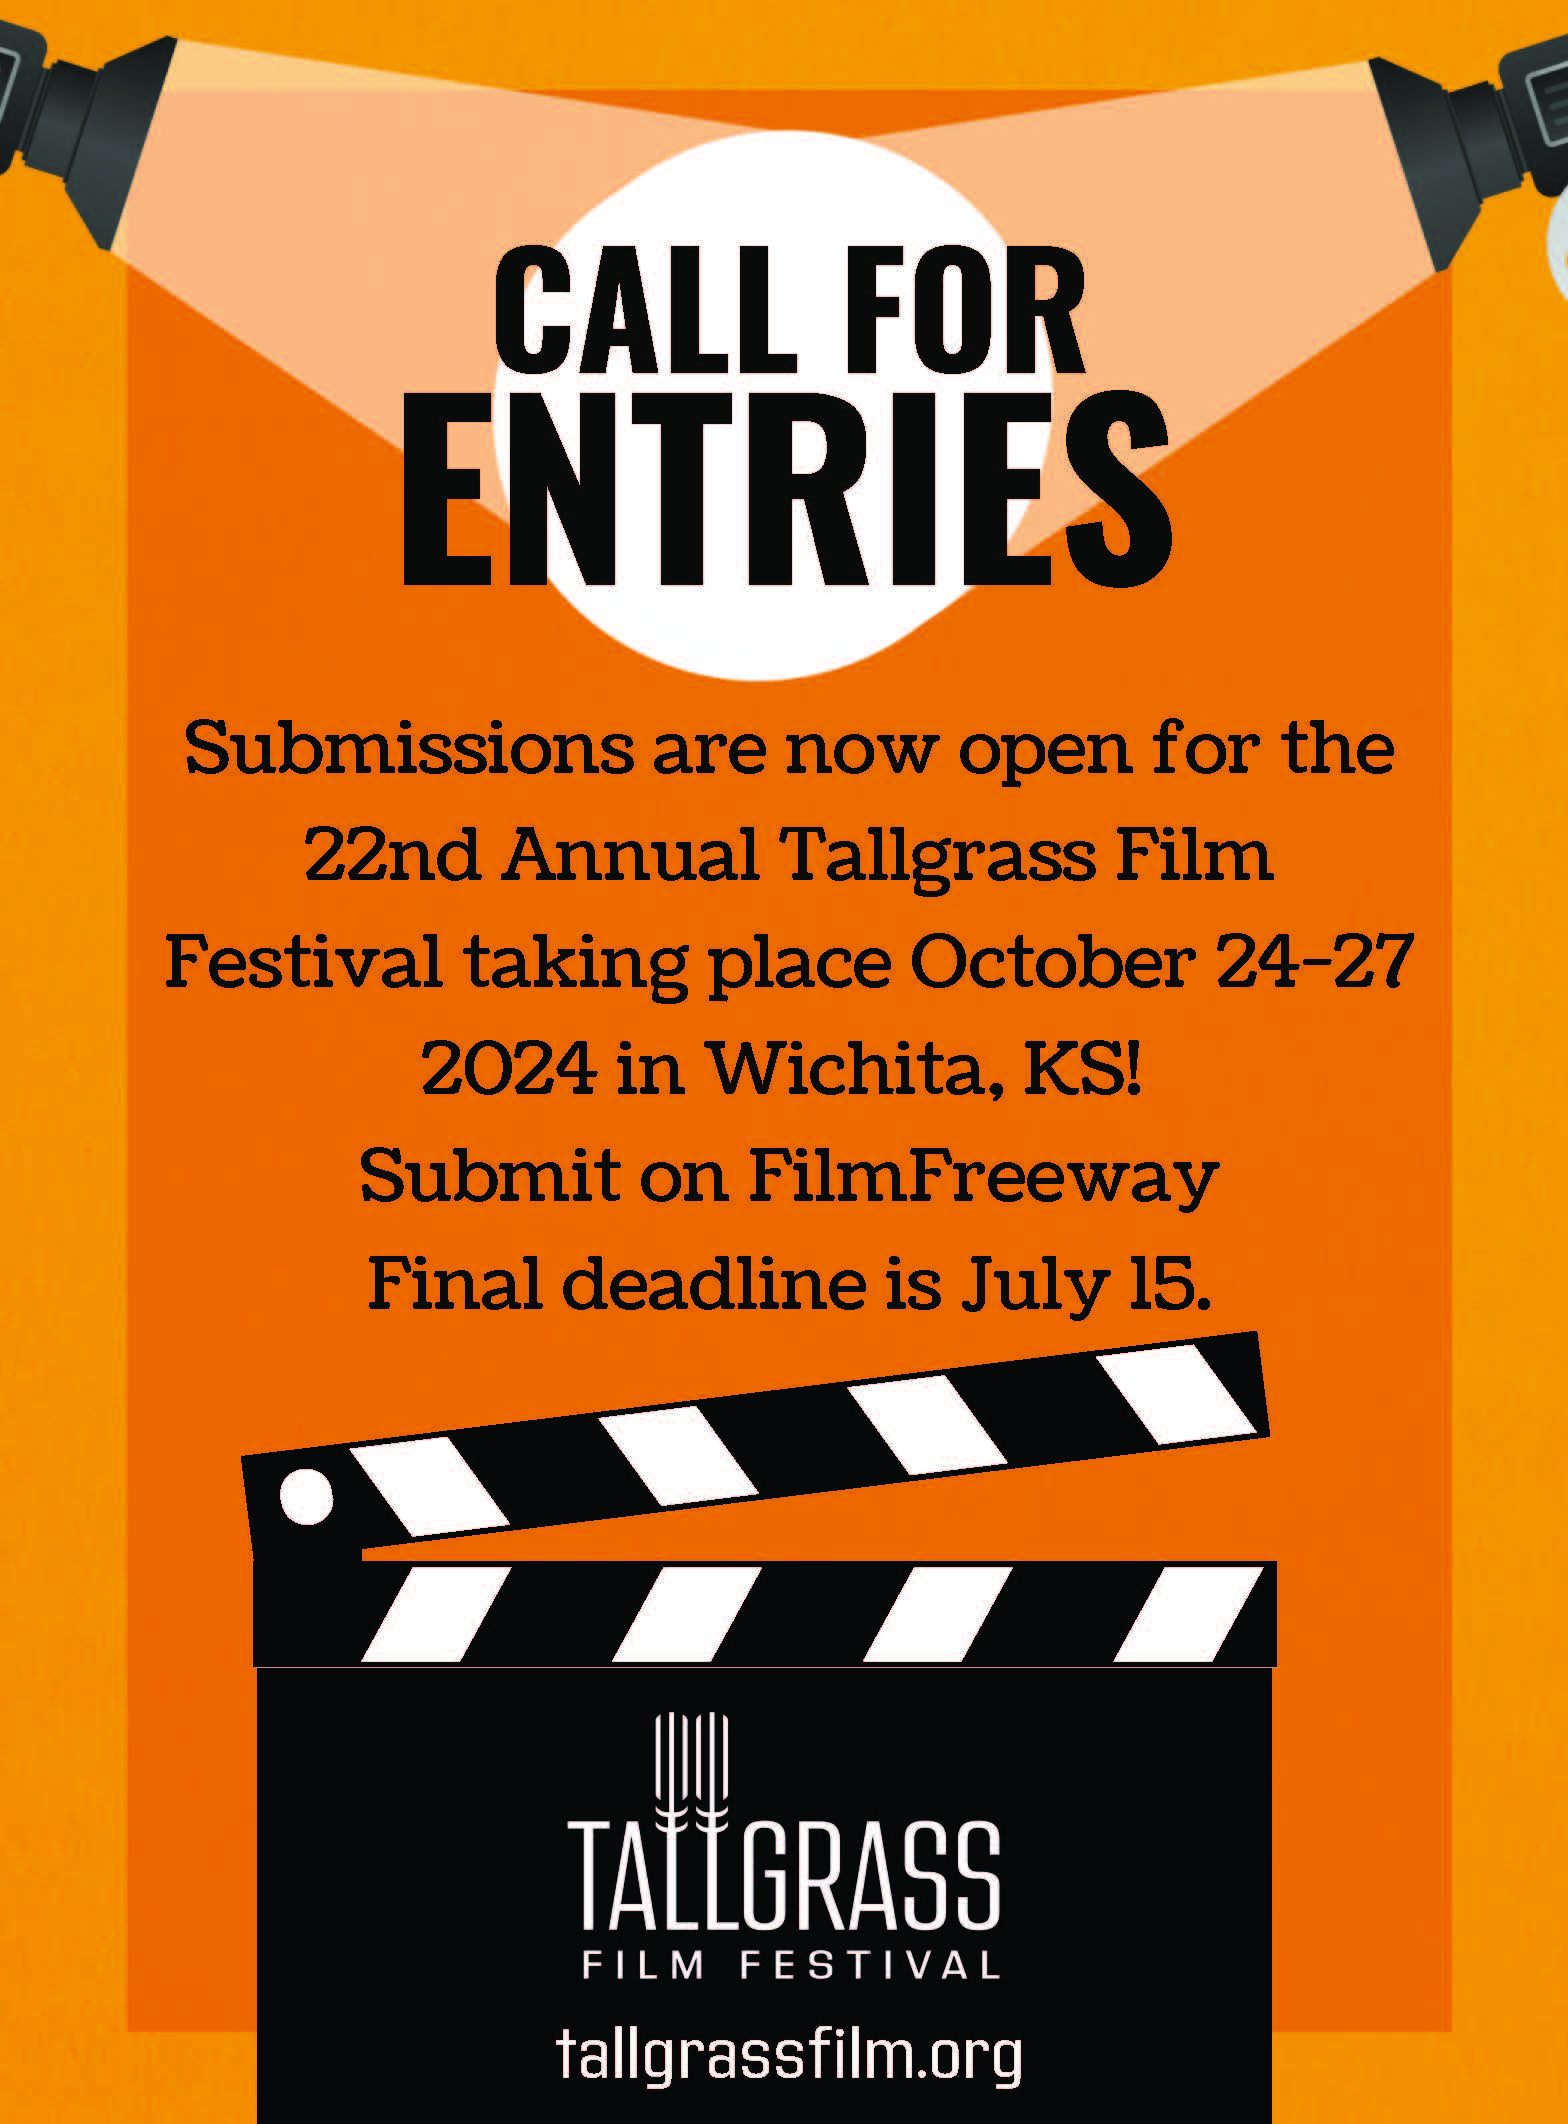 Image shows a film slate and has text that says call for submissions for Tallgrass Film Festival